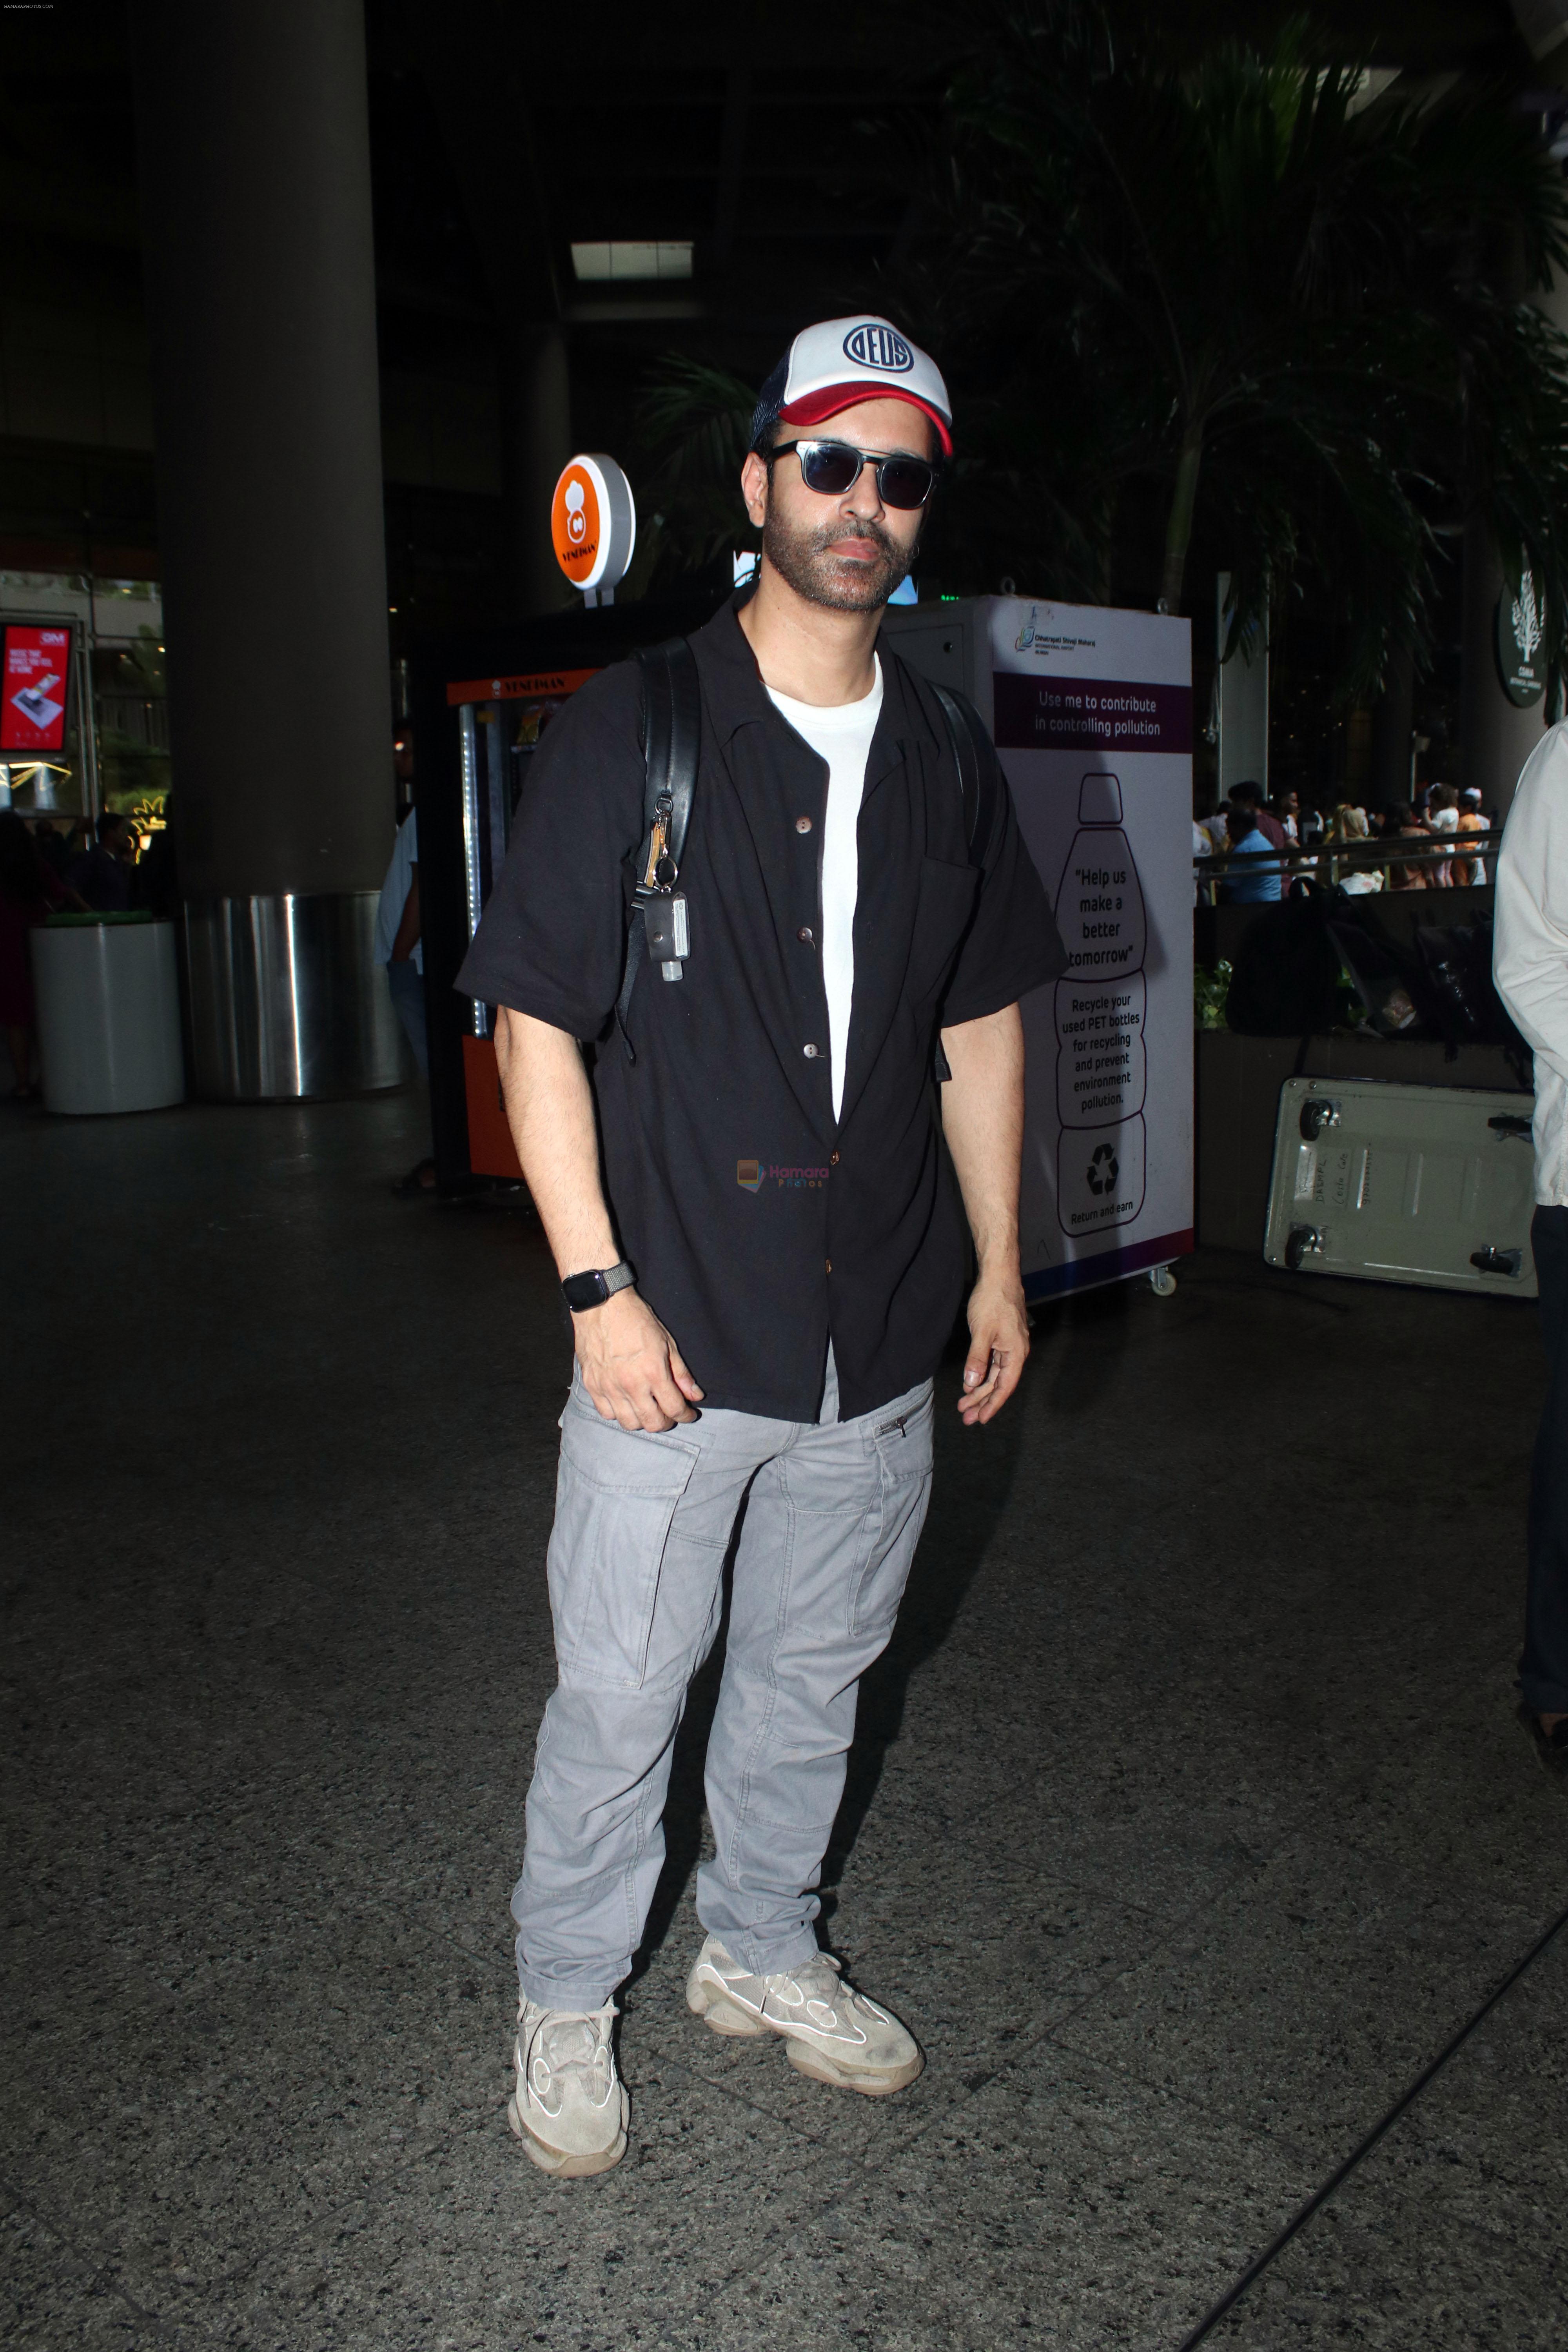 Aamir Ali seen at the airport on 24 July 2023